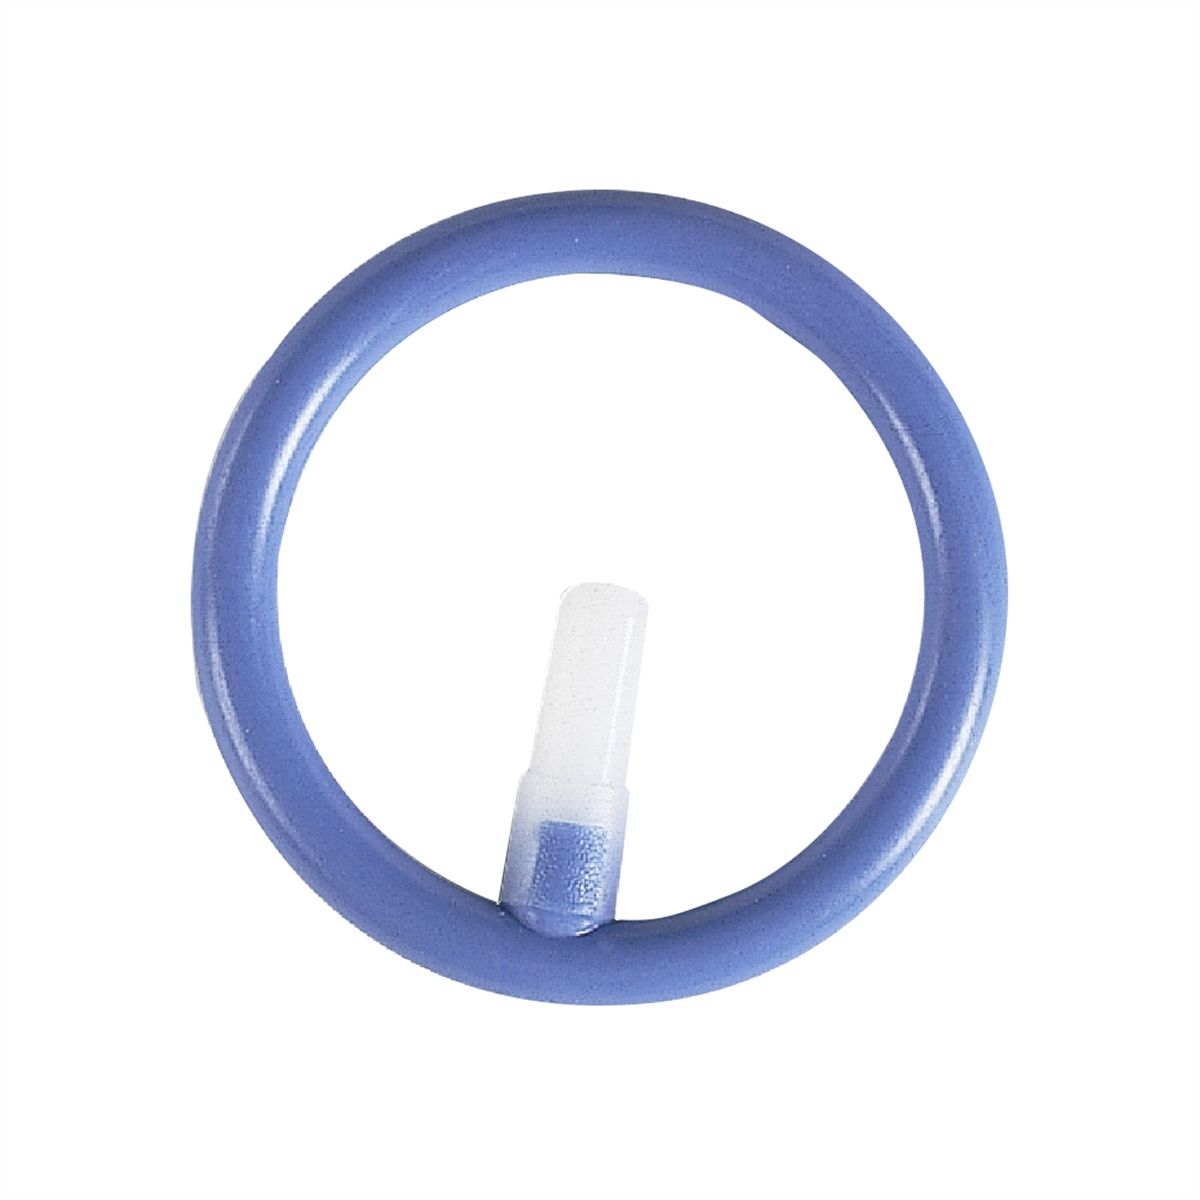 1 Inch Drive Ret Ring Socket Retainer 2.01-2.13 Inch (51mm-54mm)